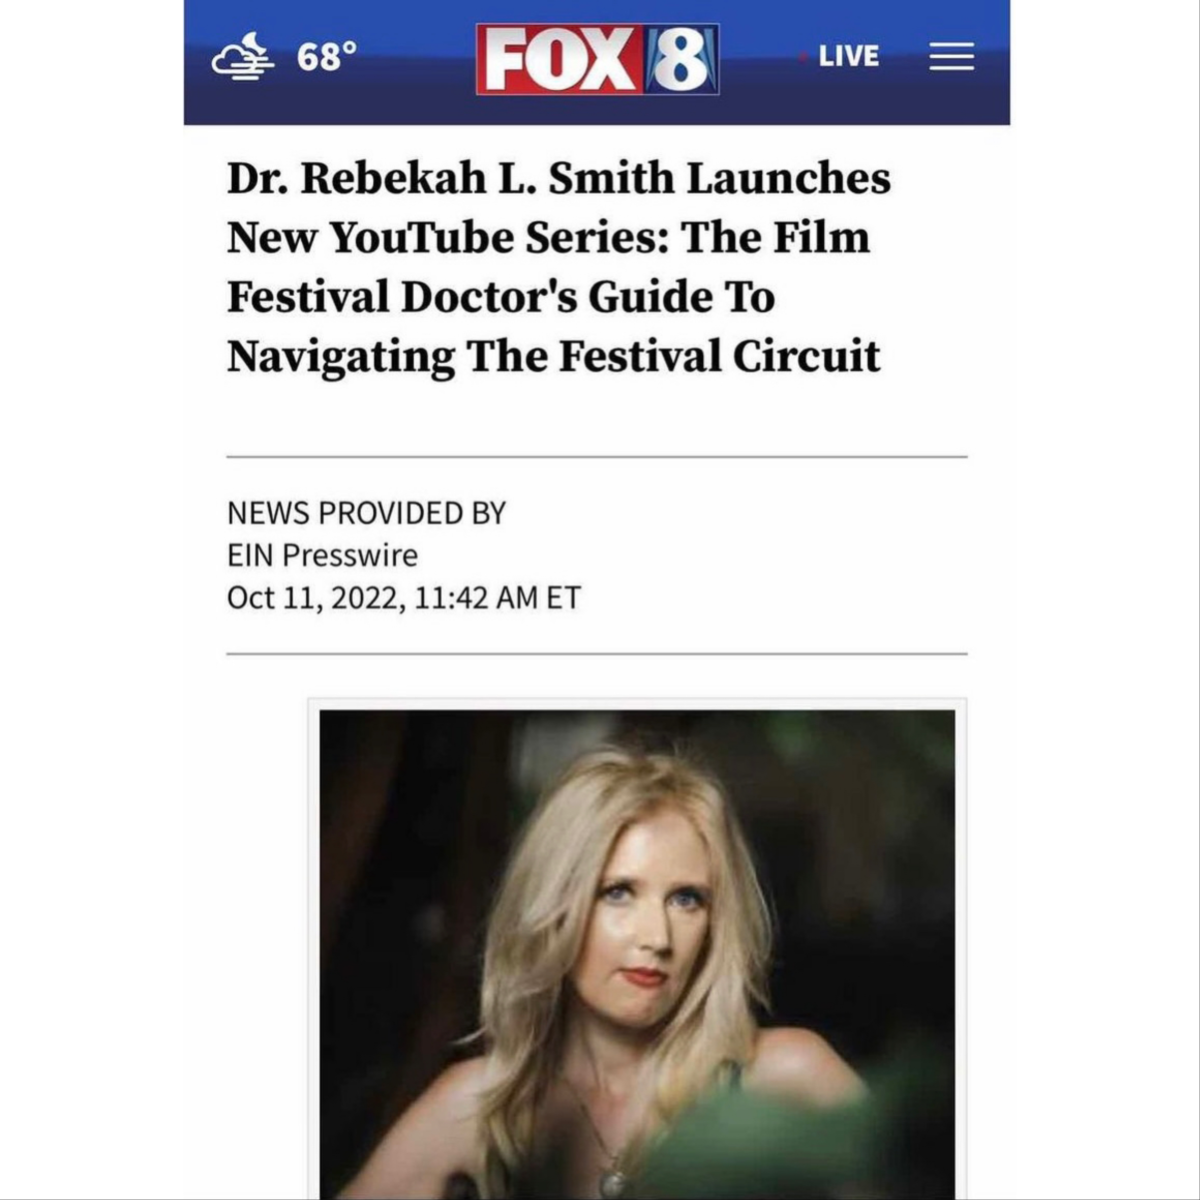 Dr. Rebekah L. Smith Launches New YouTube Series: The Film Festival Doctor’s Guide To Navigating The Festival Circuit